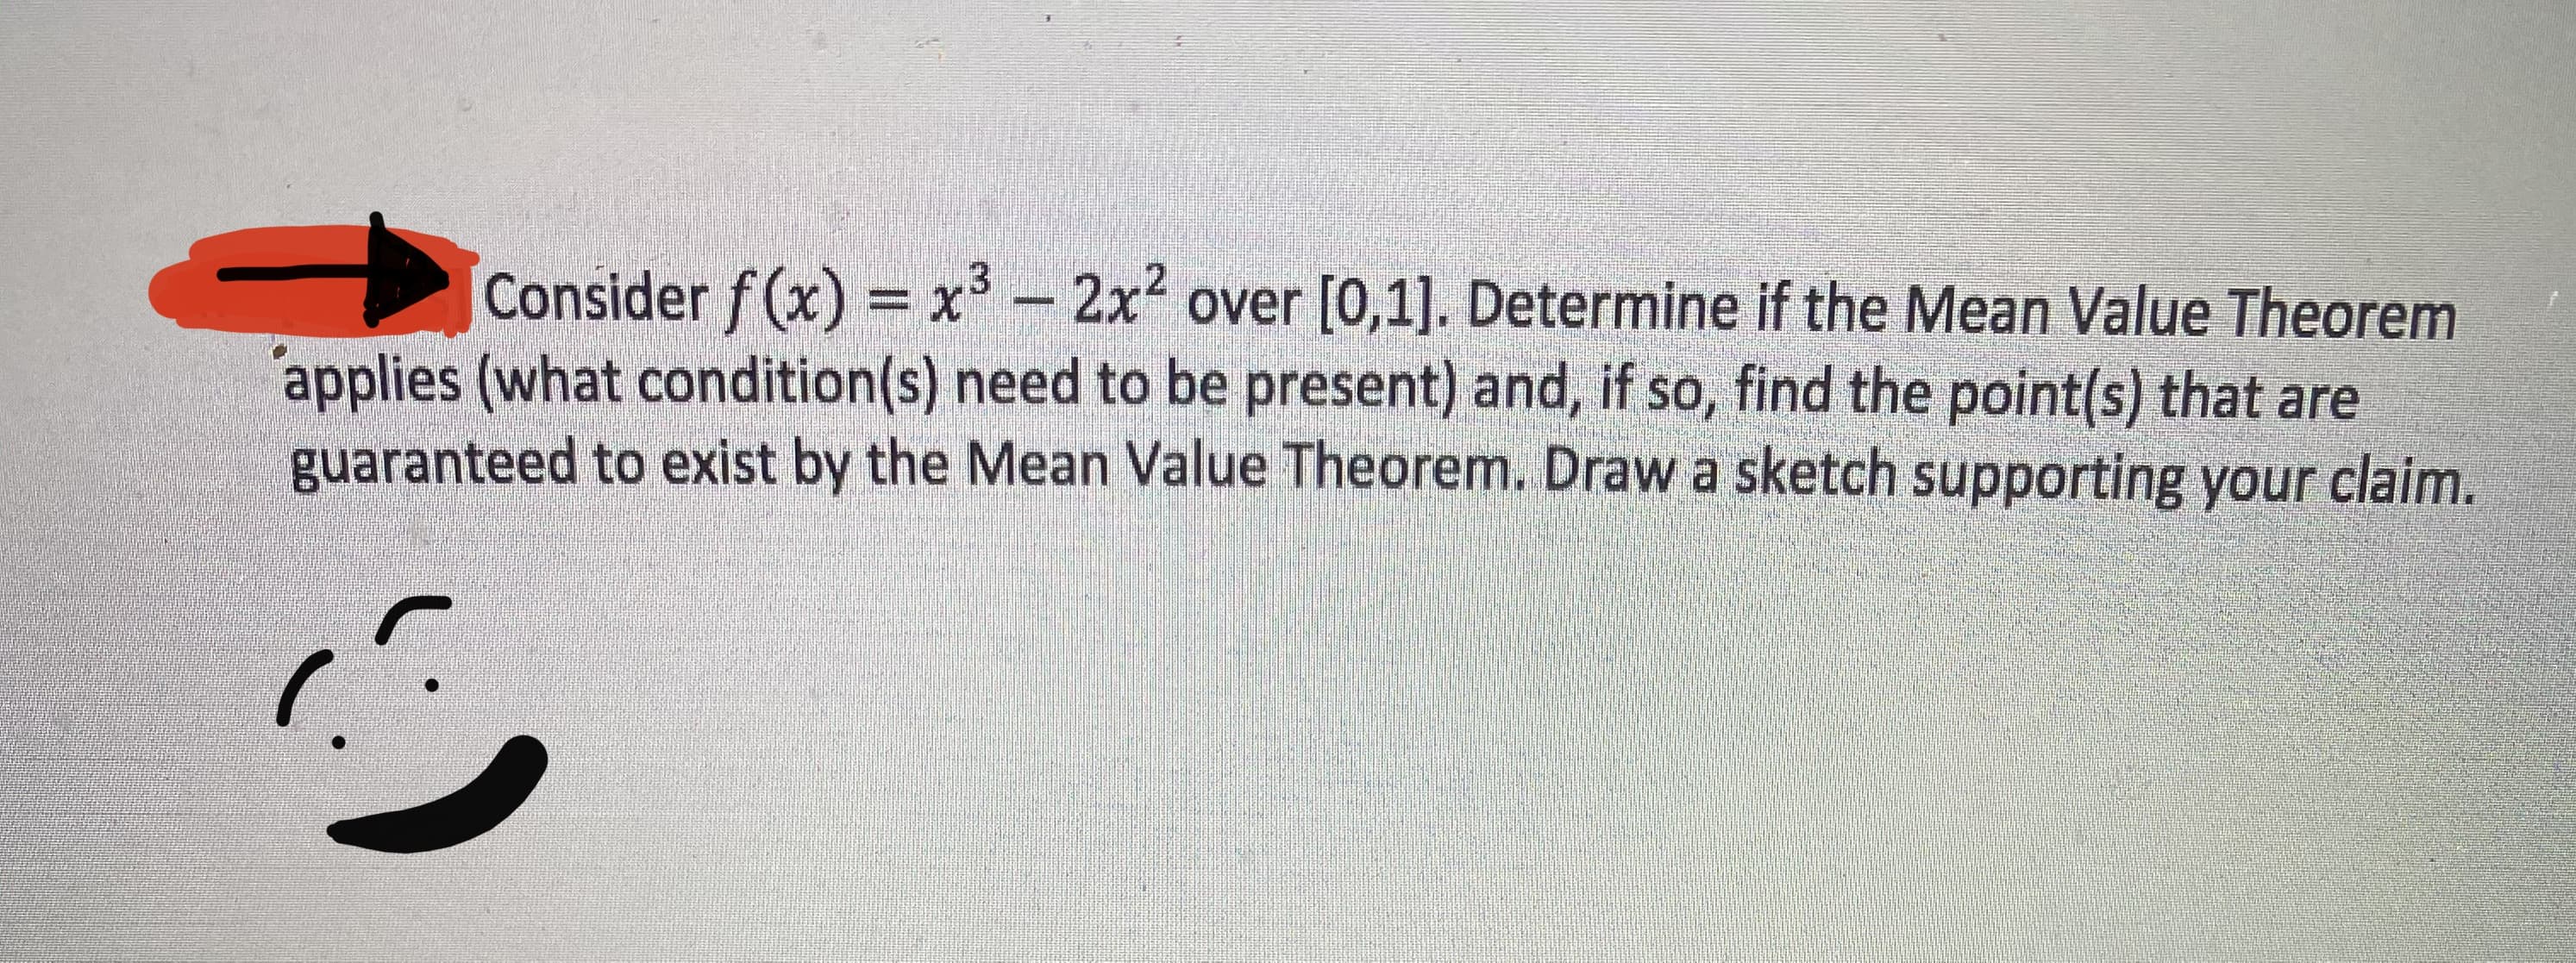 Consider f (x) = x - 2x over [0,1]. Determine if the Mean Value Theorem
applies (what condition(s) need to be present) and, if so, find the point(s) that are
guaranteed to exist by the Mean Value Theorem. Draw a sketch supporting your claim.
